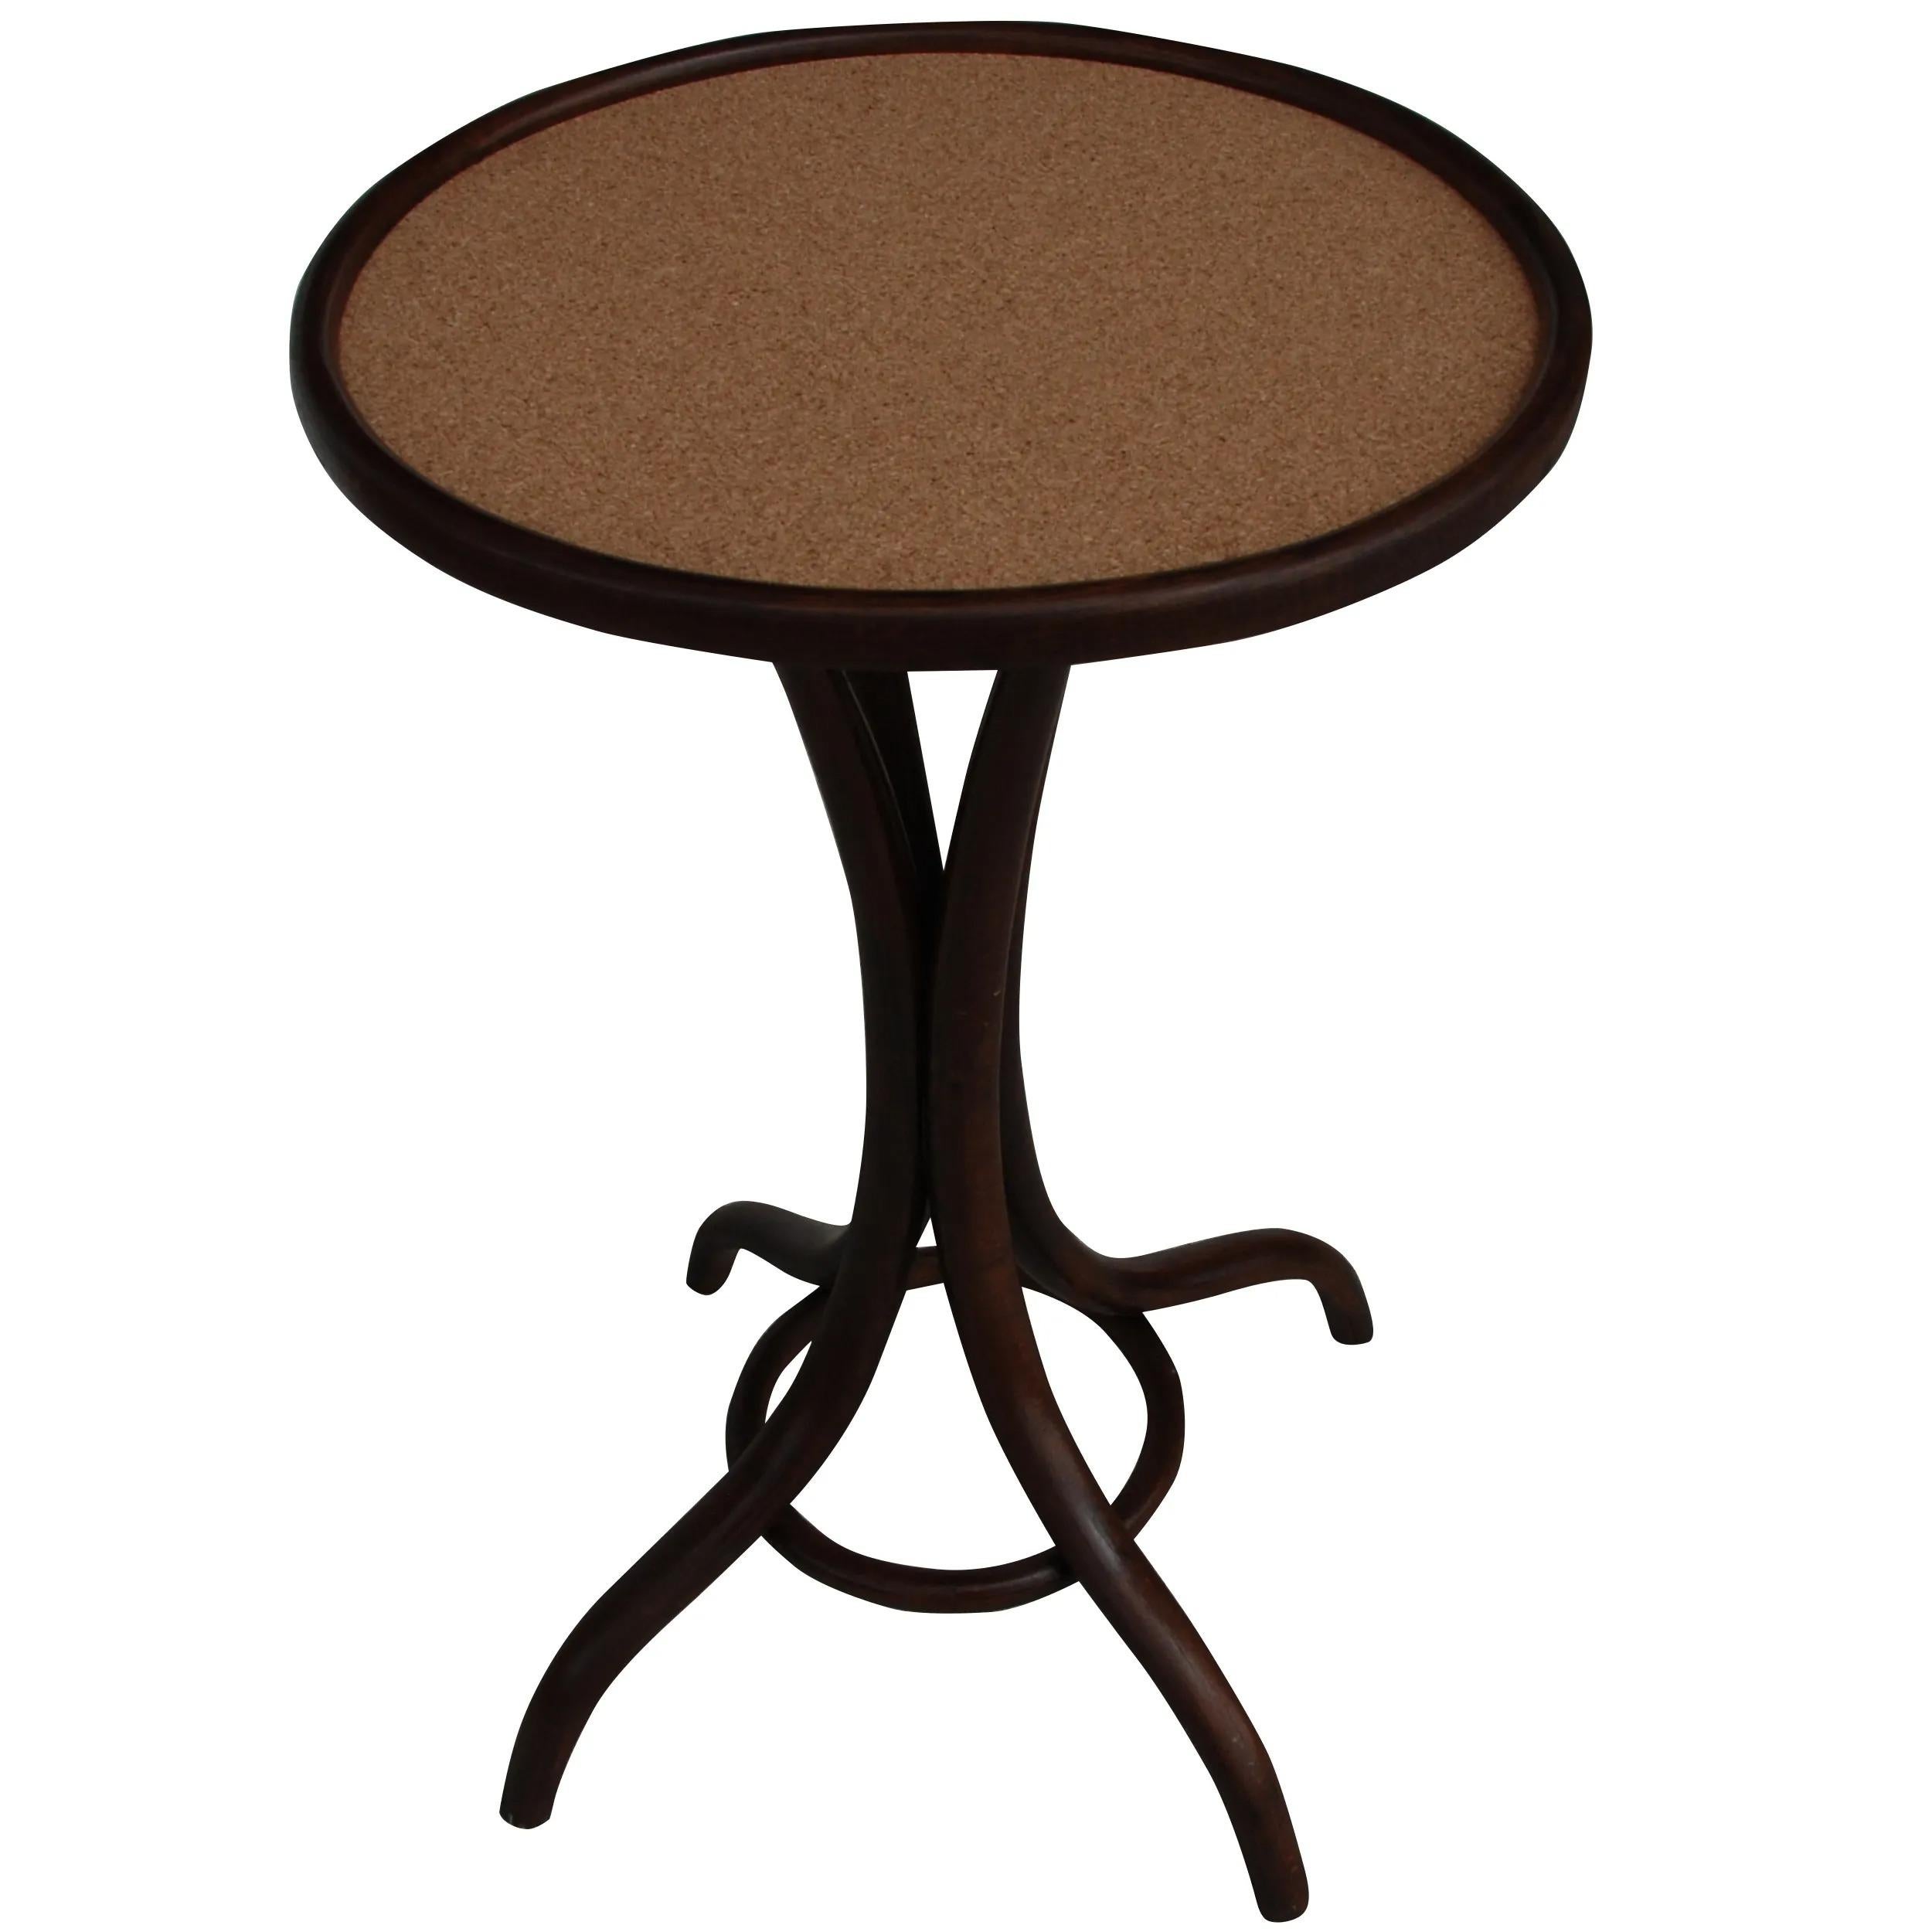 French Early Thonet Pedestal Table with Cork Top